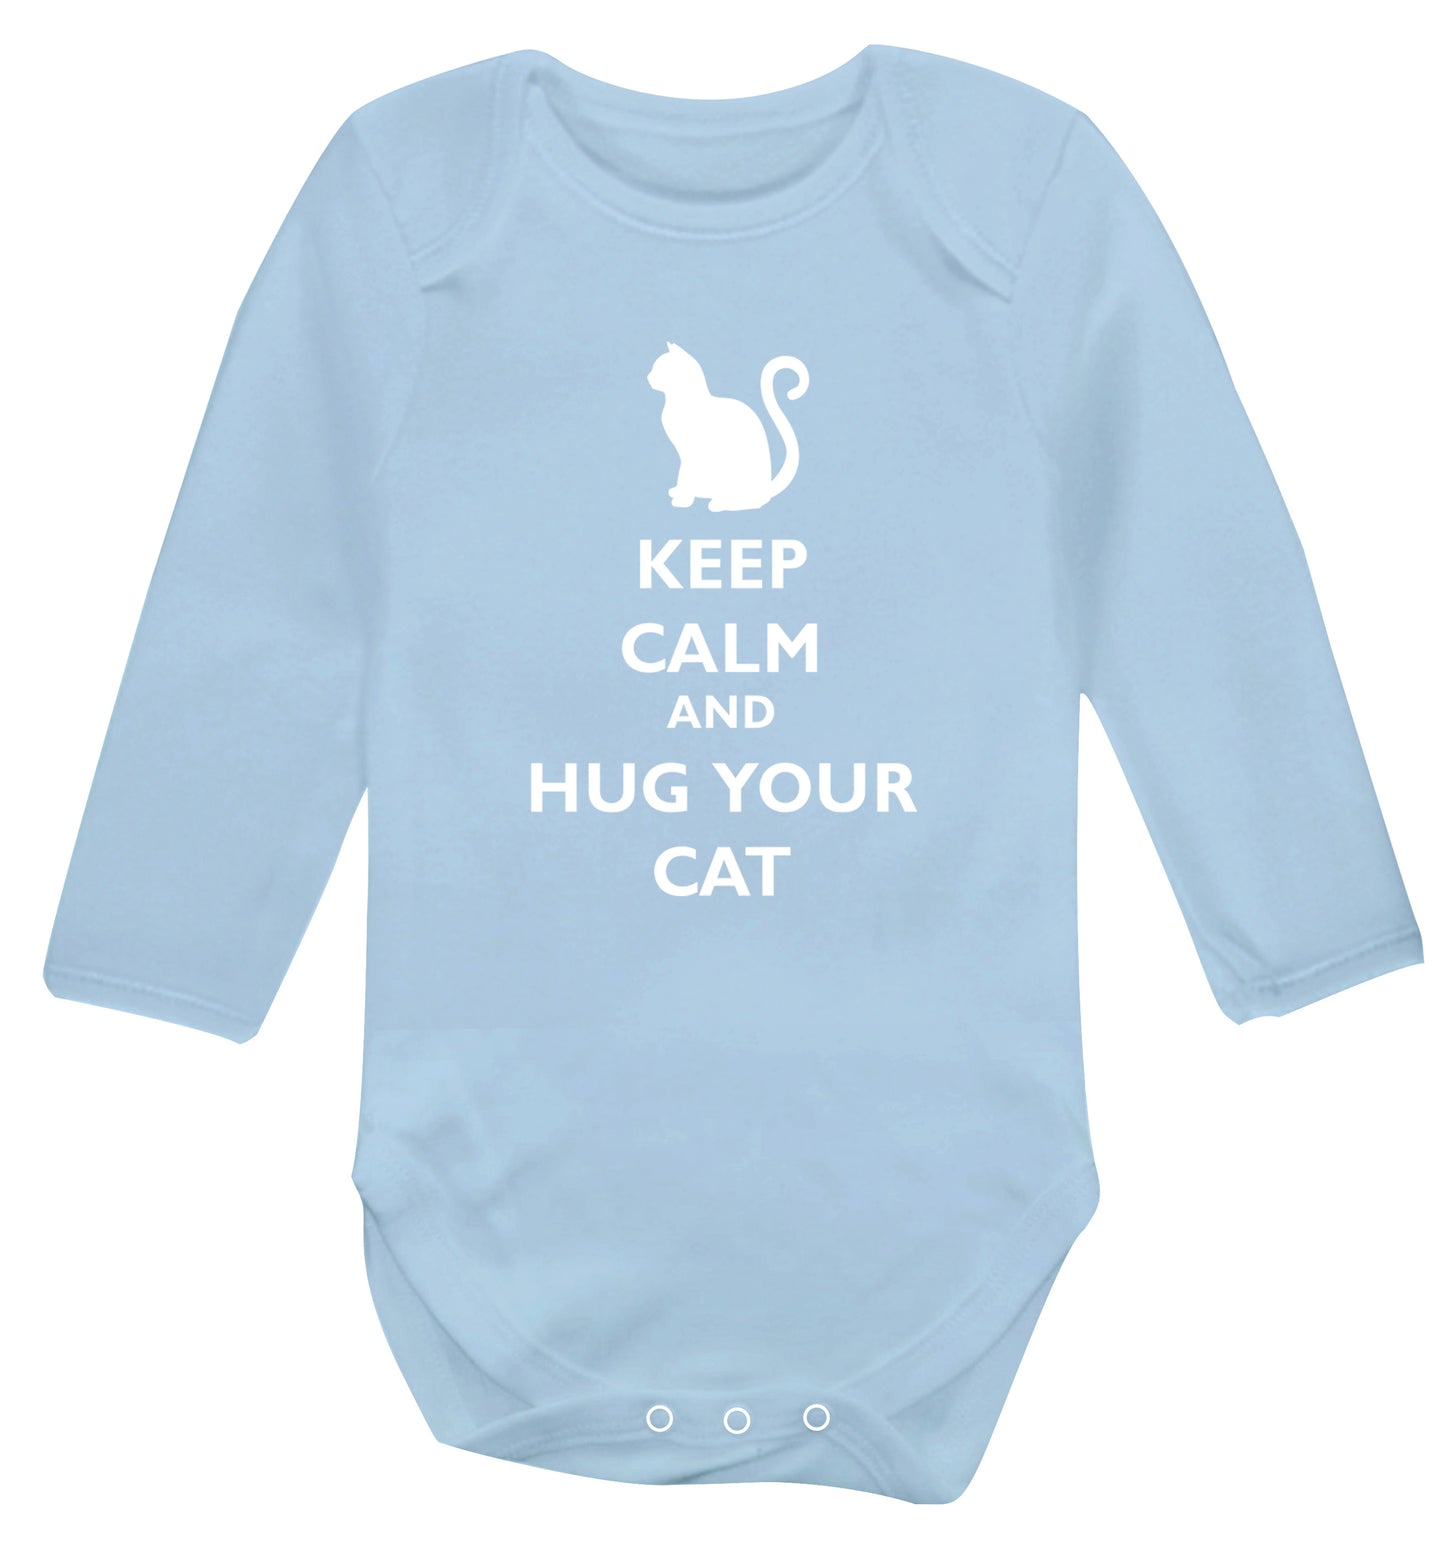 Keep calm and hug your cat Baby Vest long sleeved pale blue 6-12 months